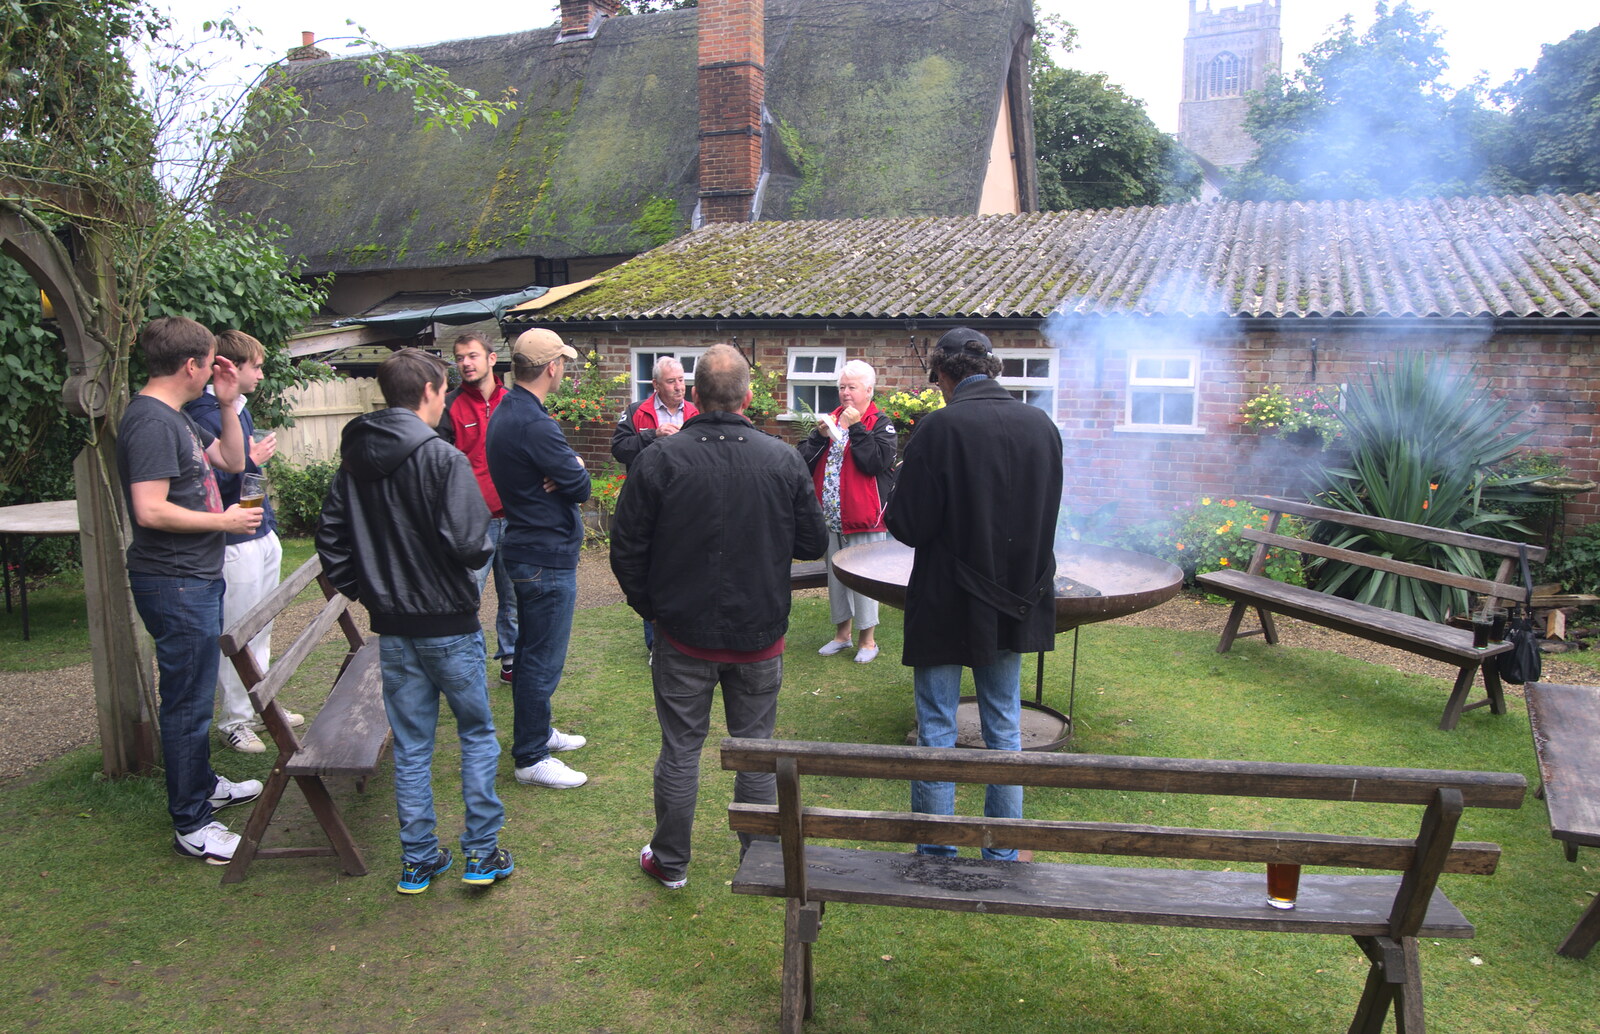 People crowd around the fire pit from The Low House Beer Festival, Laxfield, Suffolk - 15th September 2013